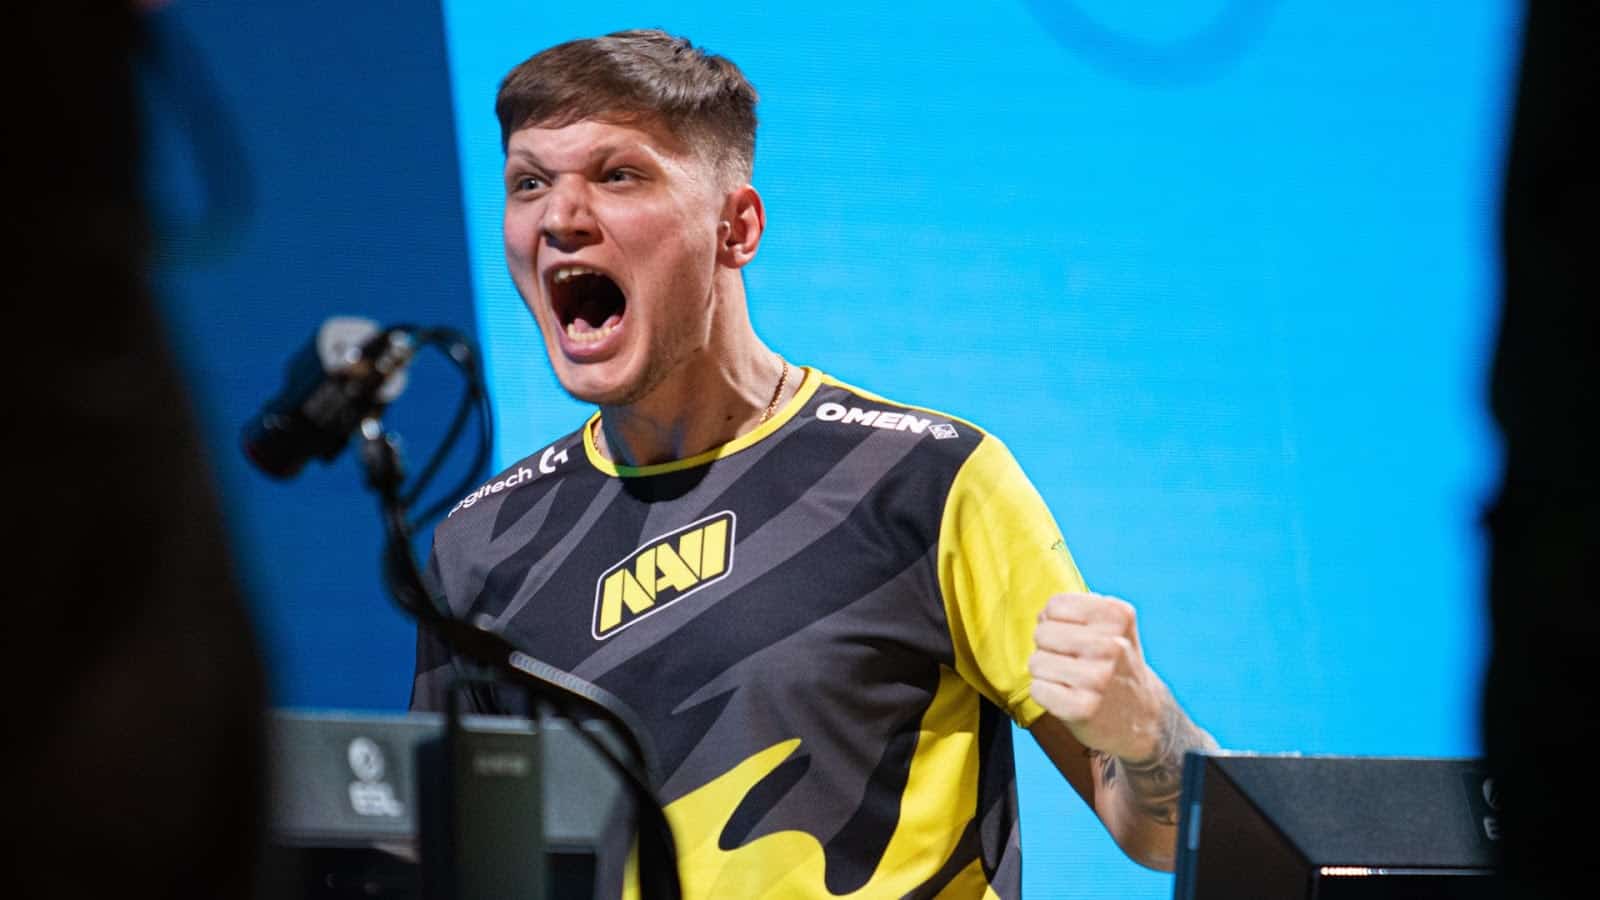 s1mple Sets a New CSGO Record with 8 MVPs